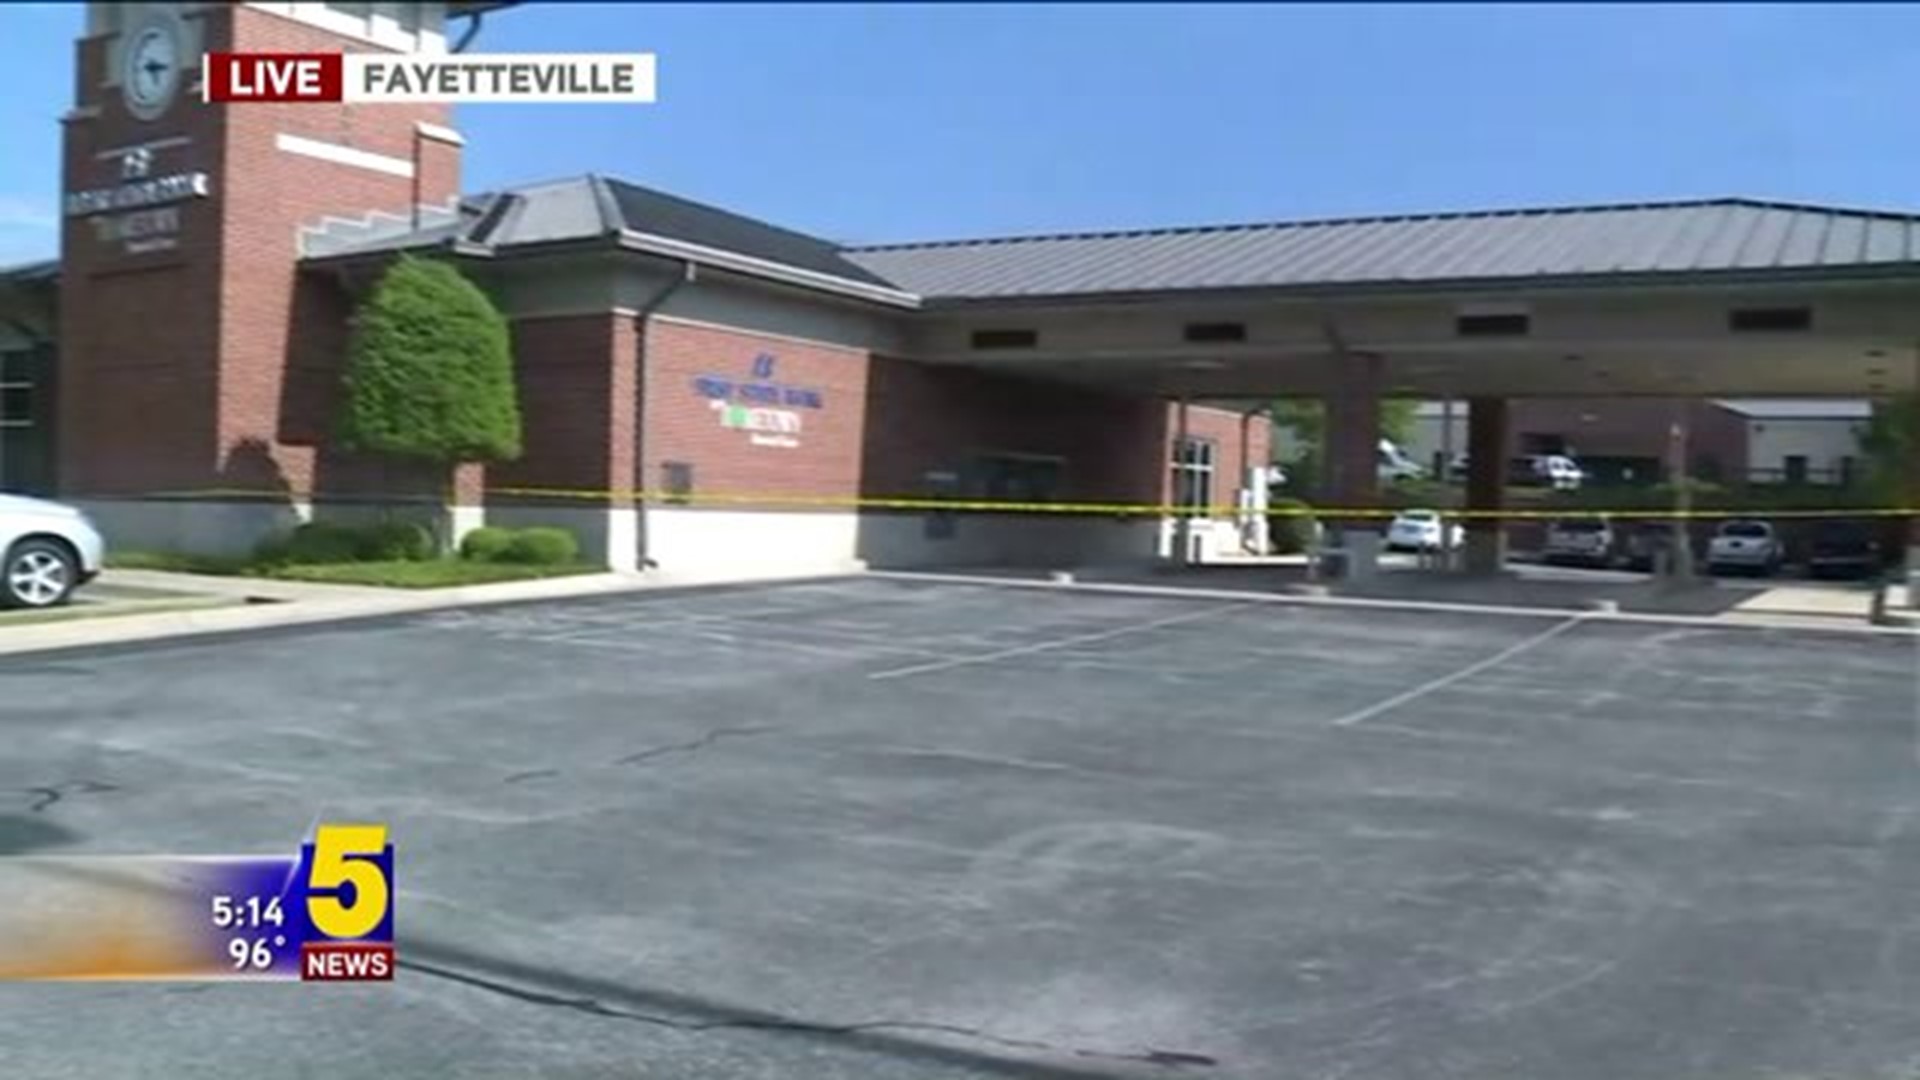 Bank Robbed In Fayetteville